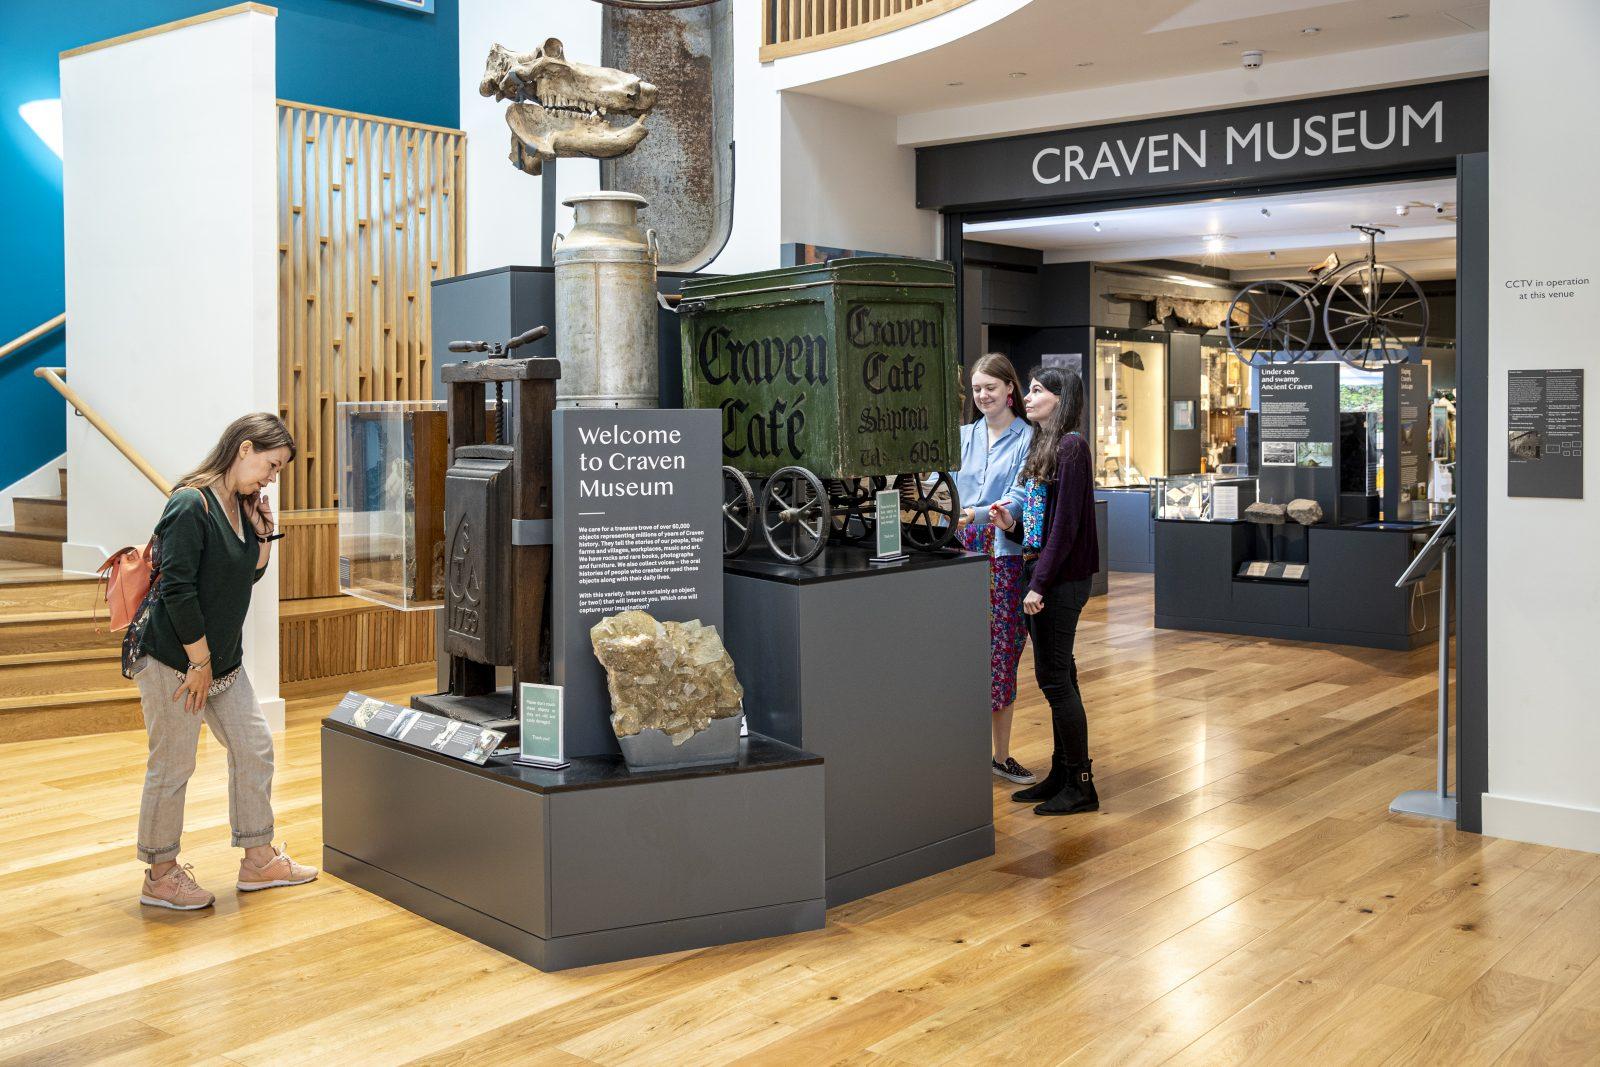 Craven Museum shortlisted for Art Fund Museum of the Year